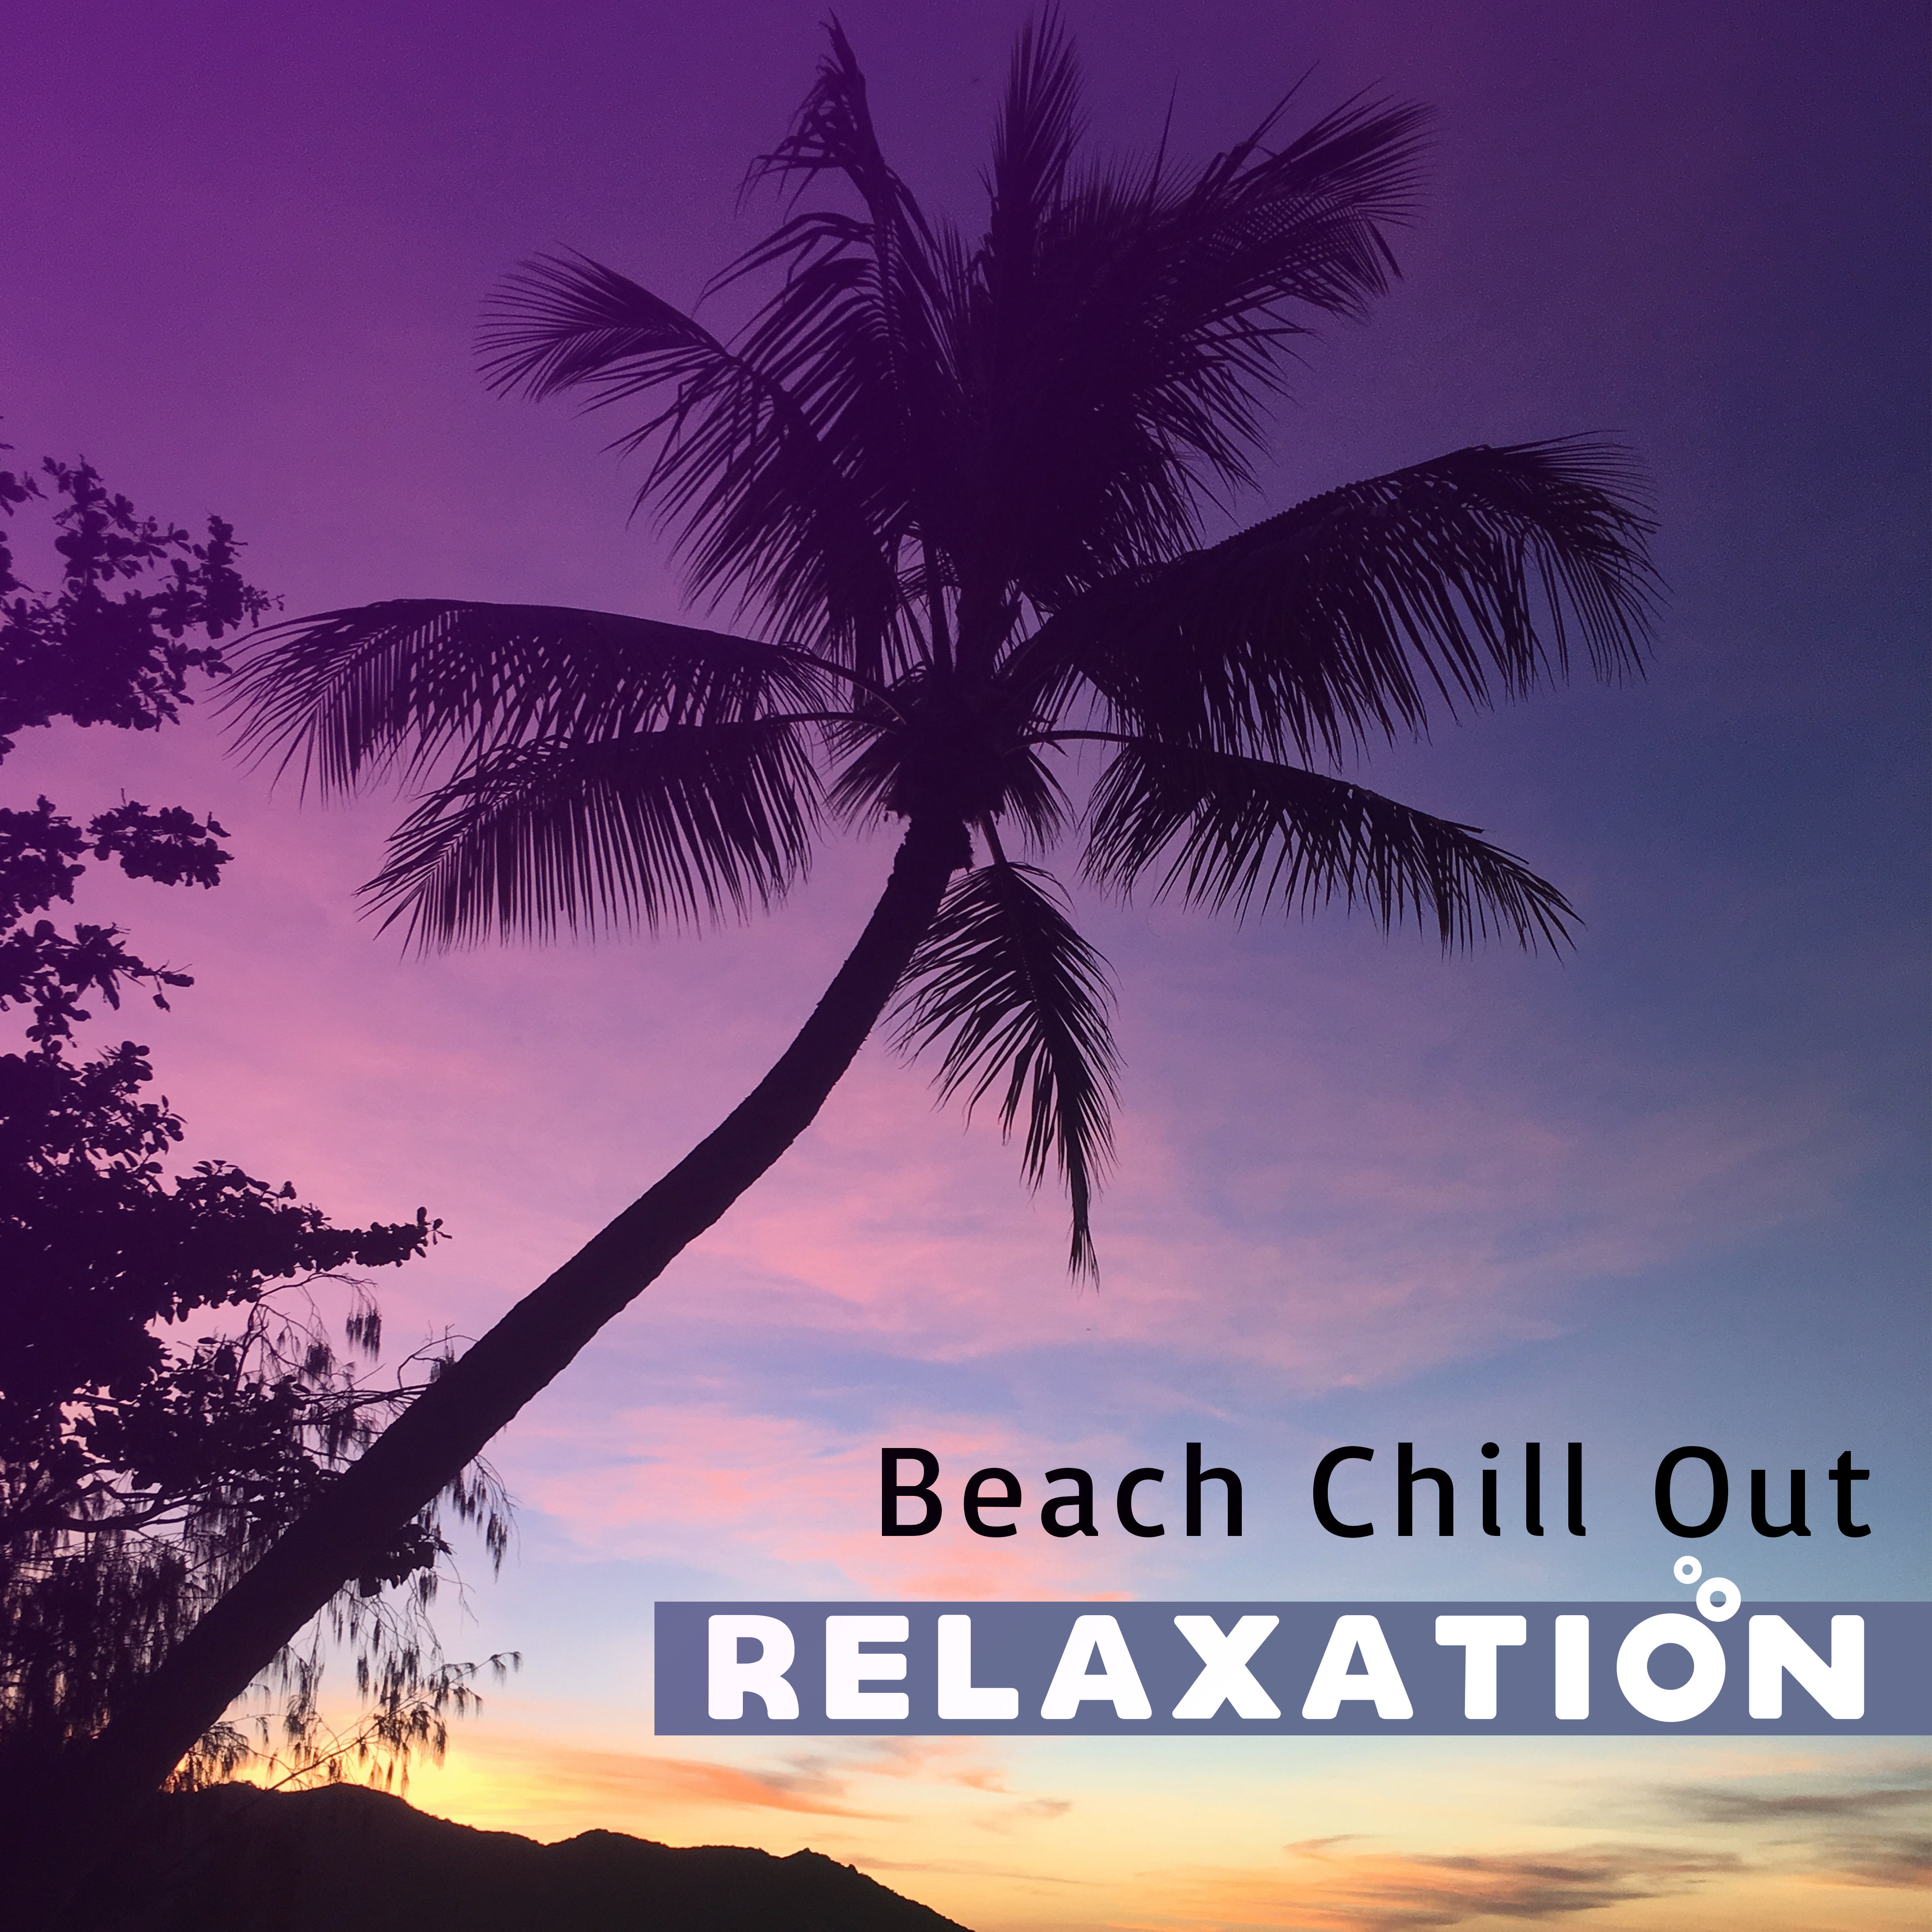 Beach Chill Out Relaxation – Summer Rest, Chill Out Beats, Calming Waves, Peaceful Mind